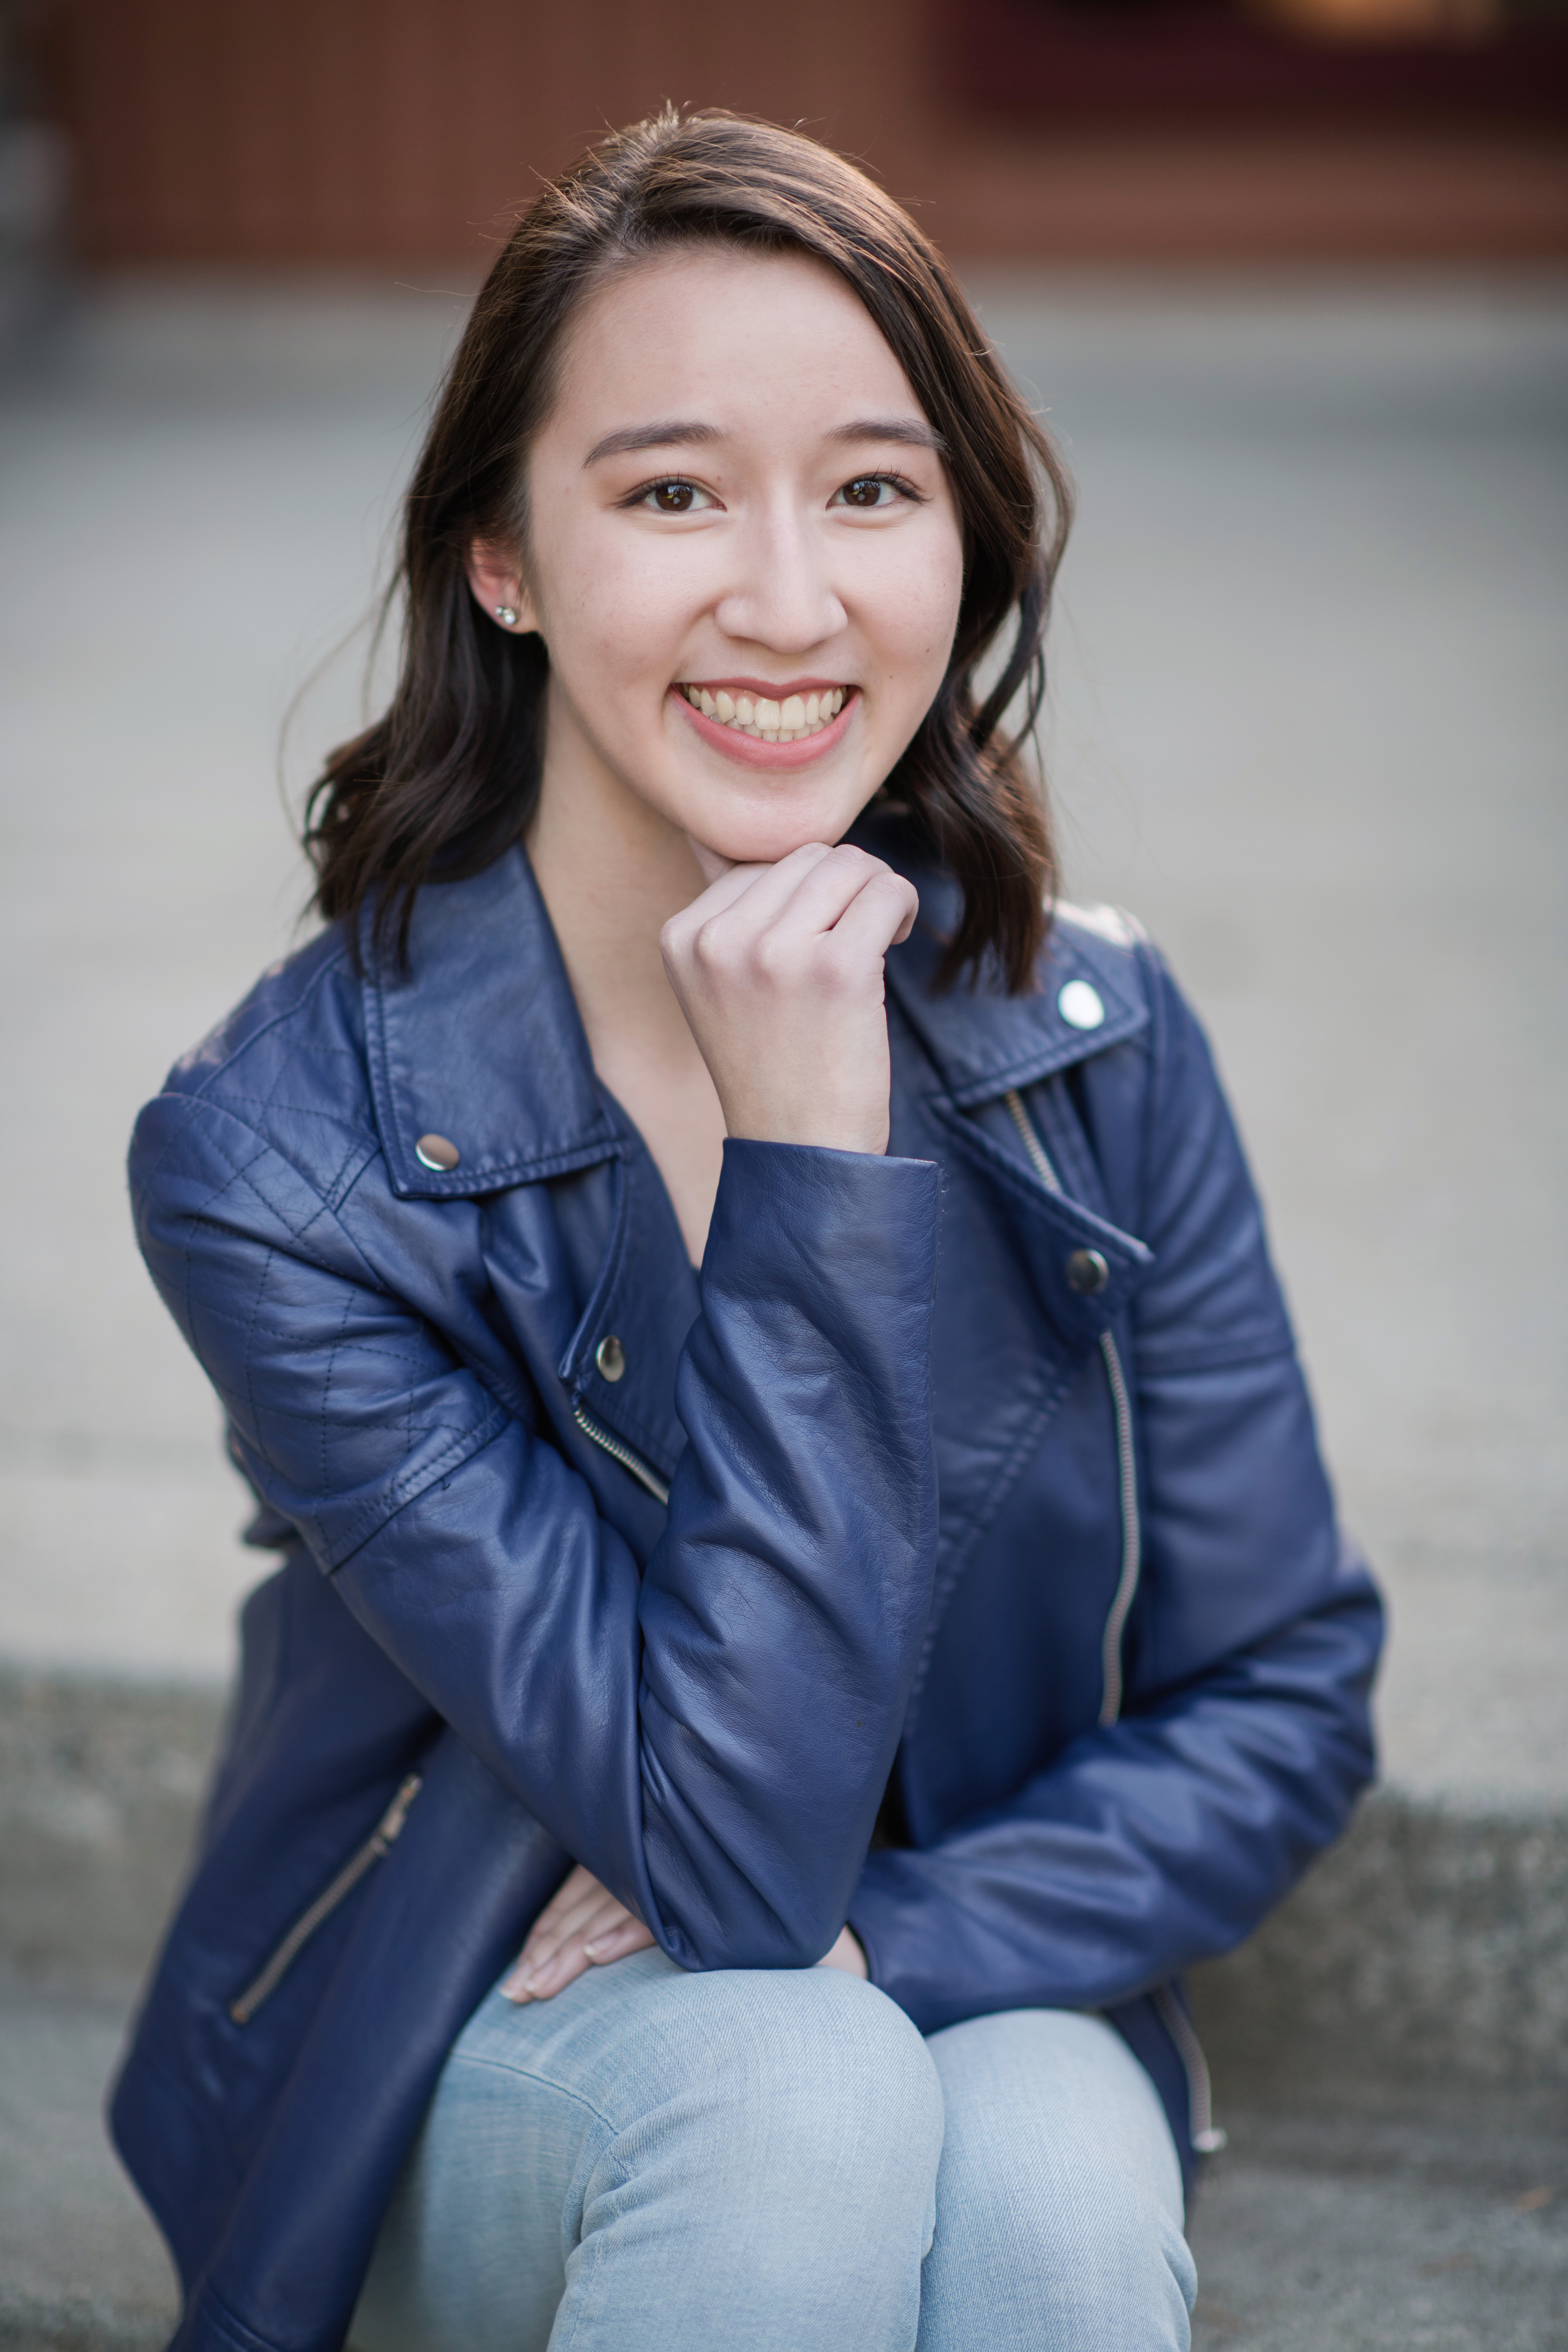 Portrait of Olivia smiling with her chin resting on her hand. She's wearing a blue jacket and is sitting on cement steps